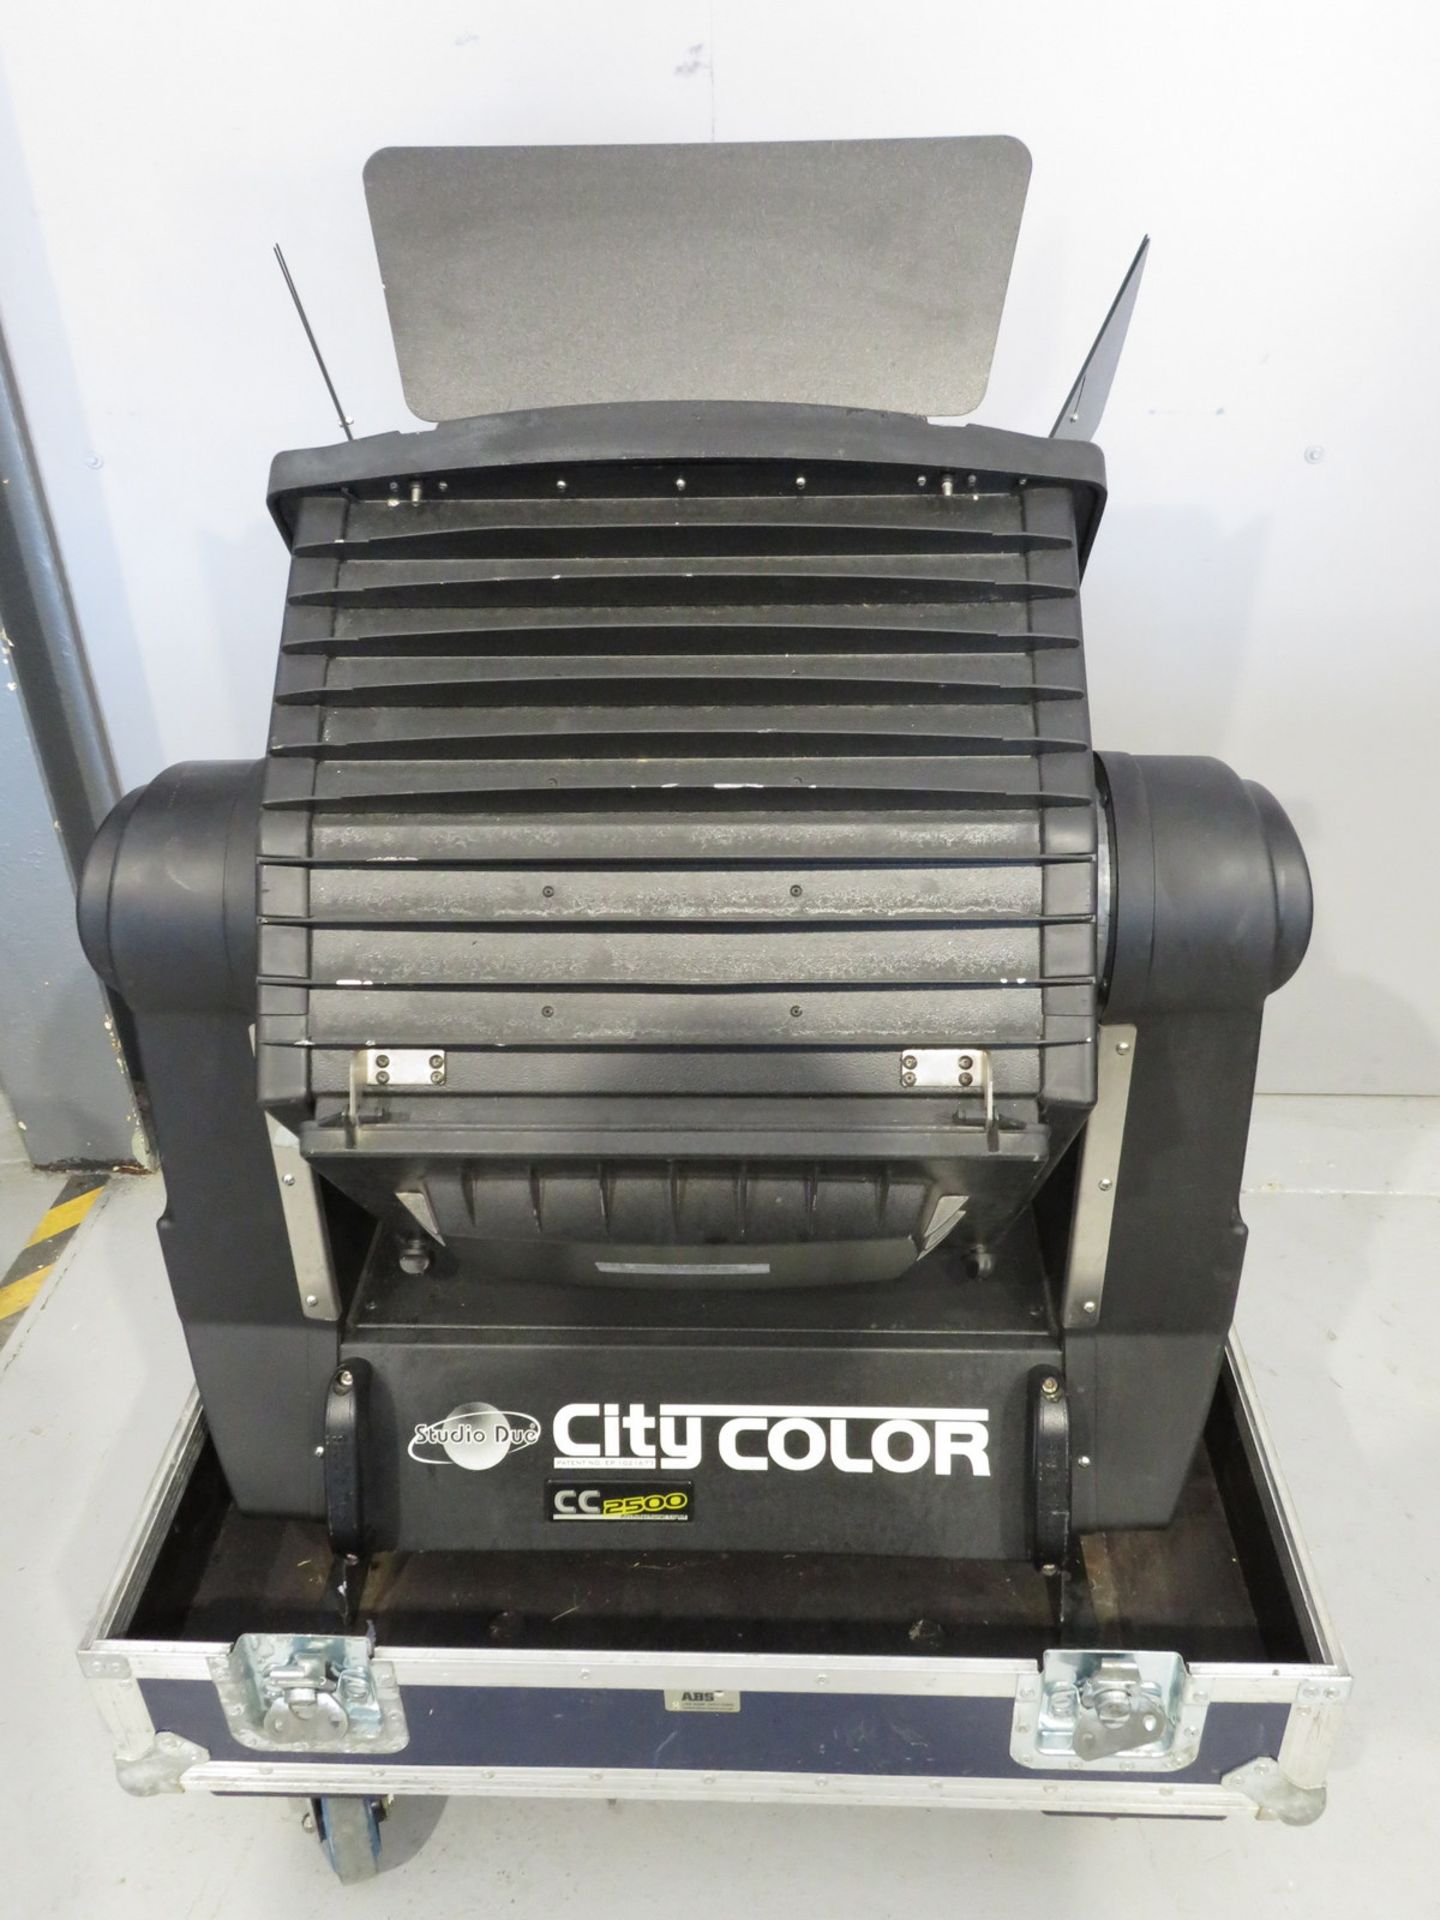 Studio Due City Colour 2500 Wash in flightcase. Working condition. Hours: 1320. - Image 7 of 9